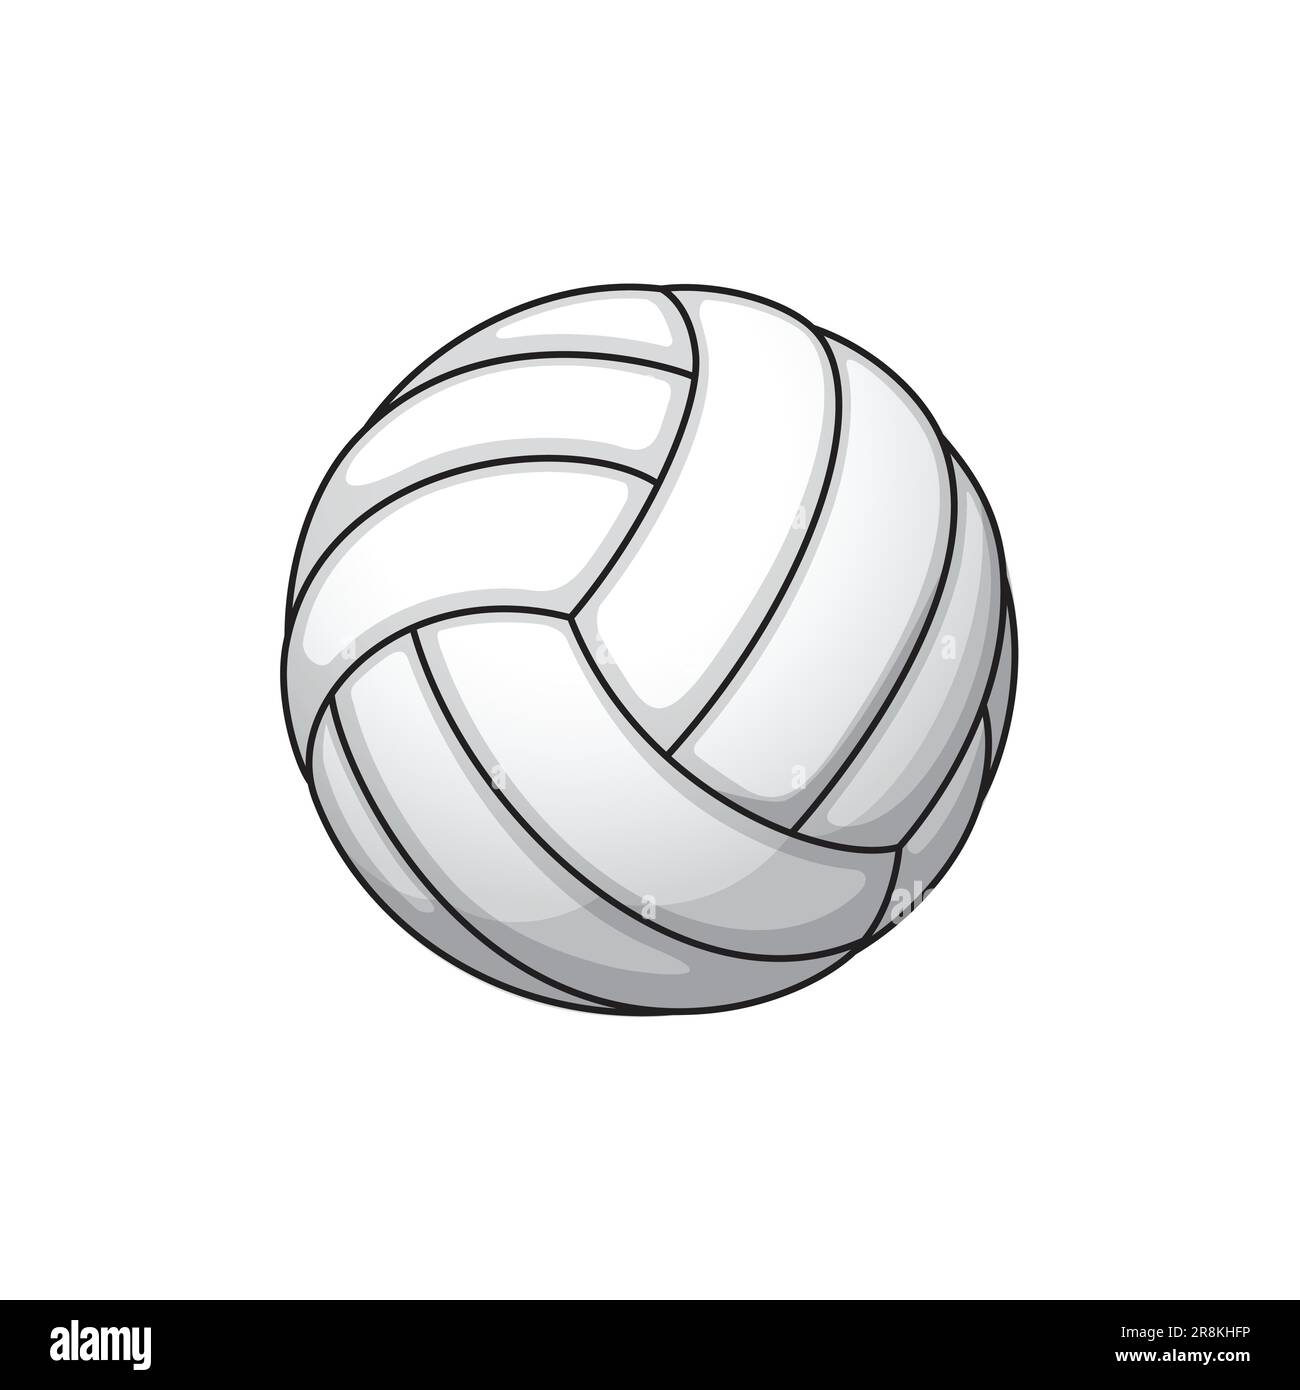 simple classic white volleyball ball outline drawing symbol logo vector ...